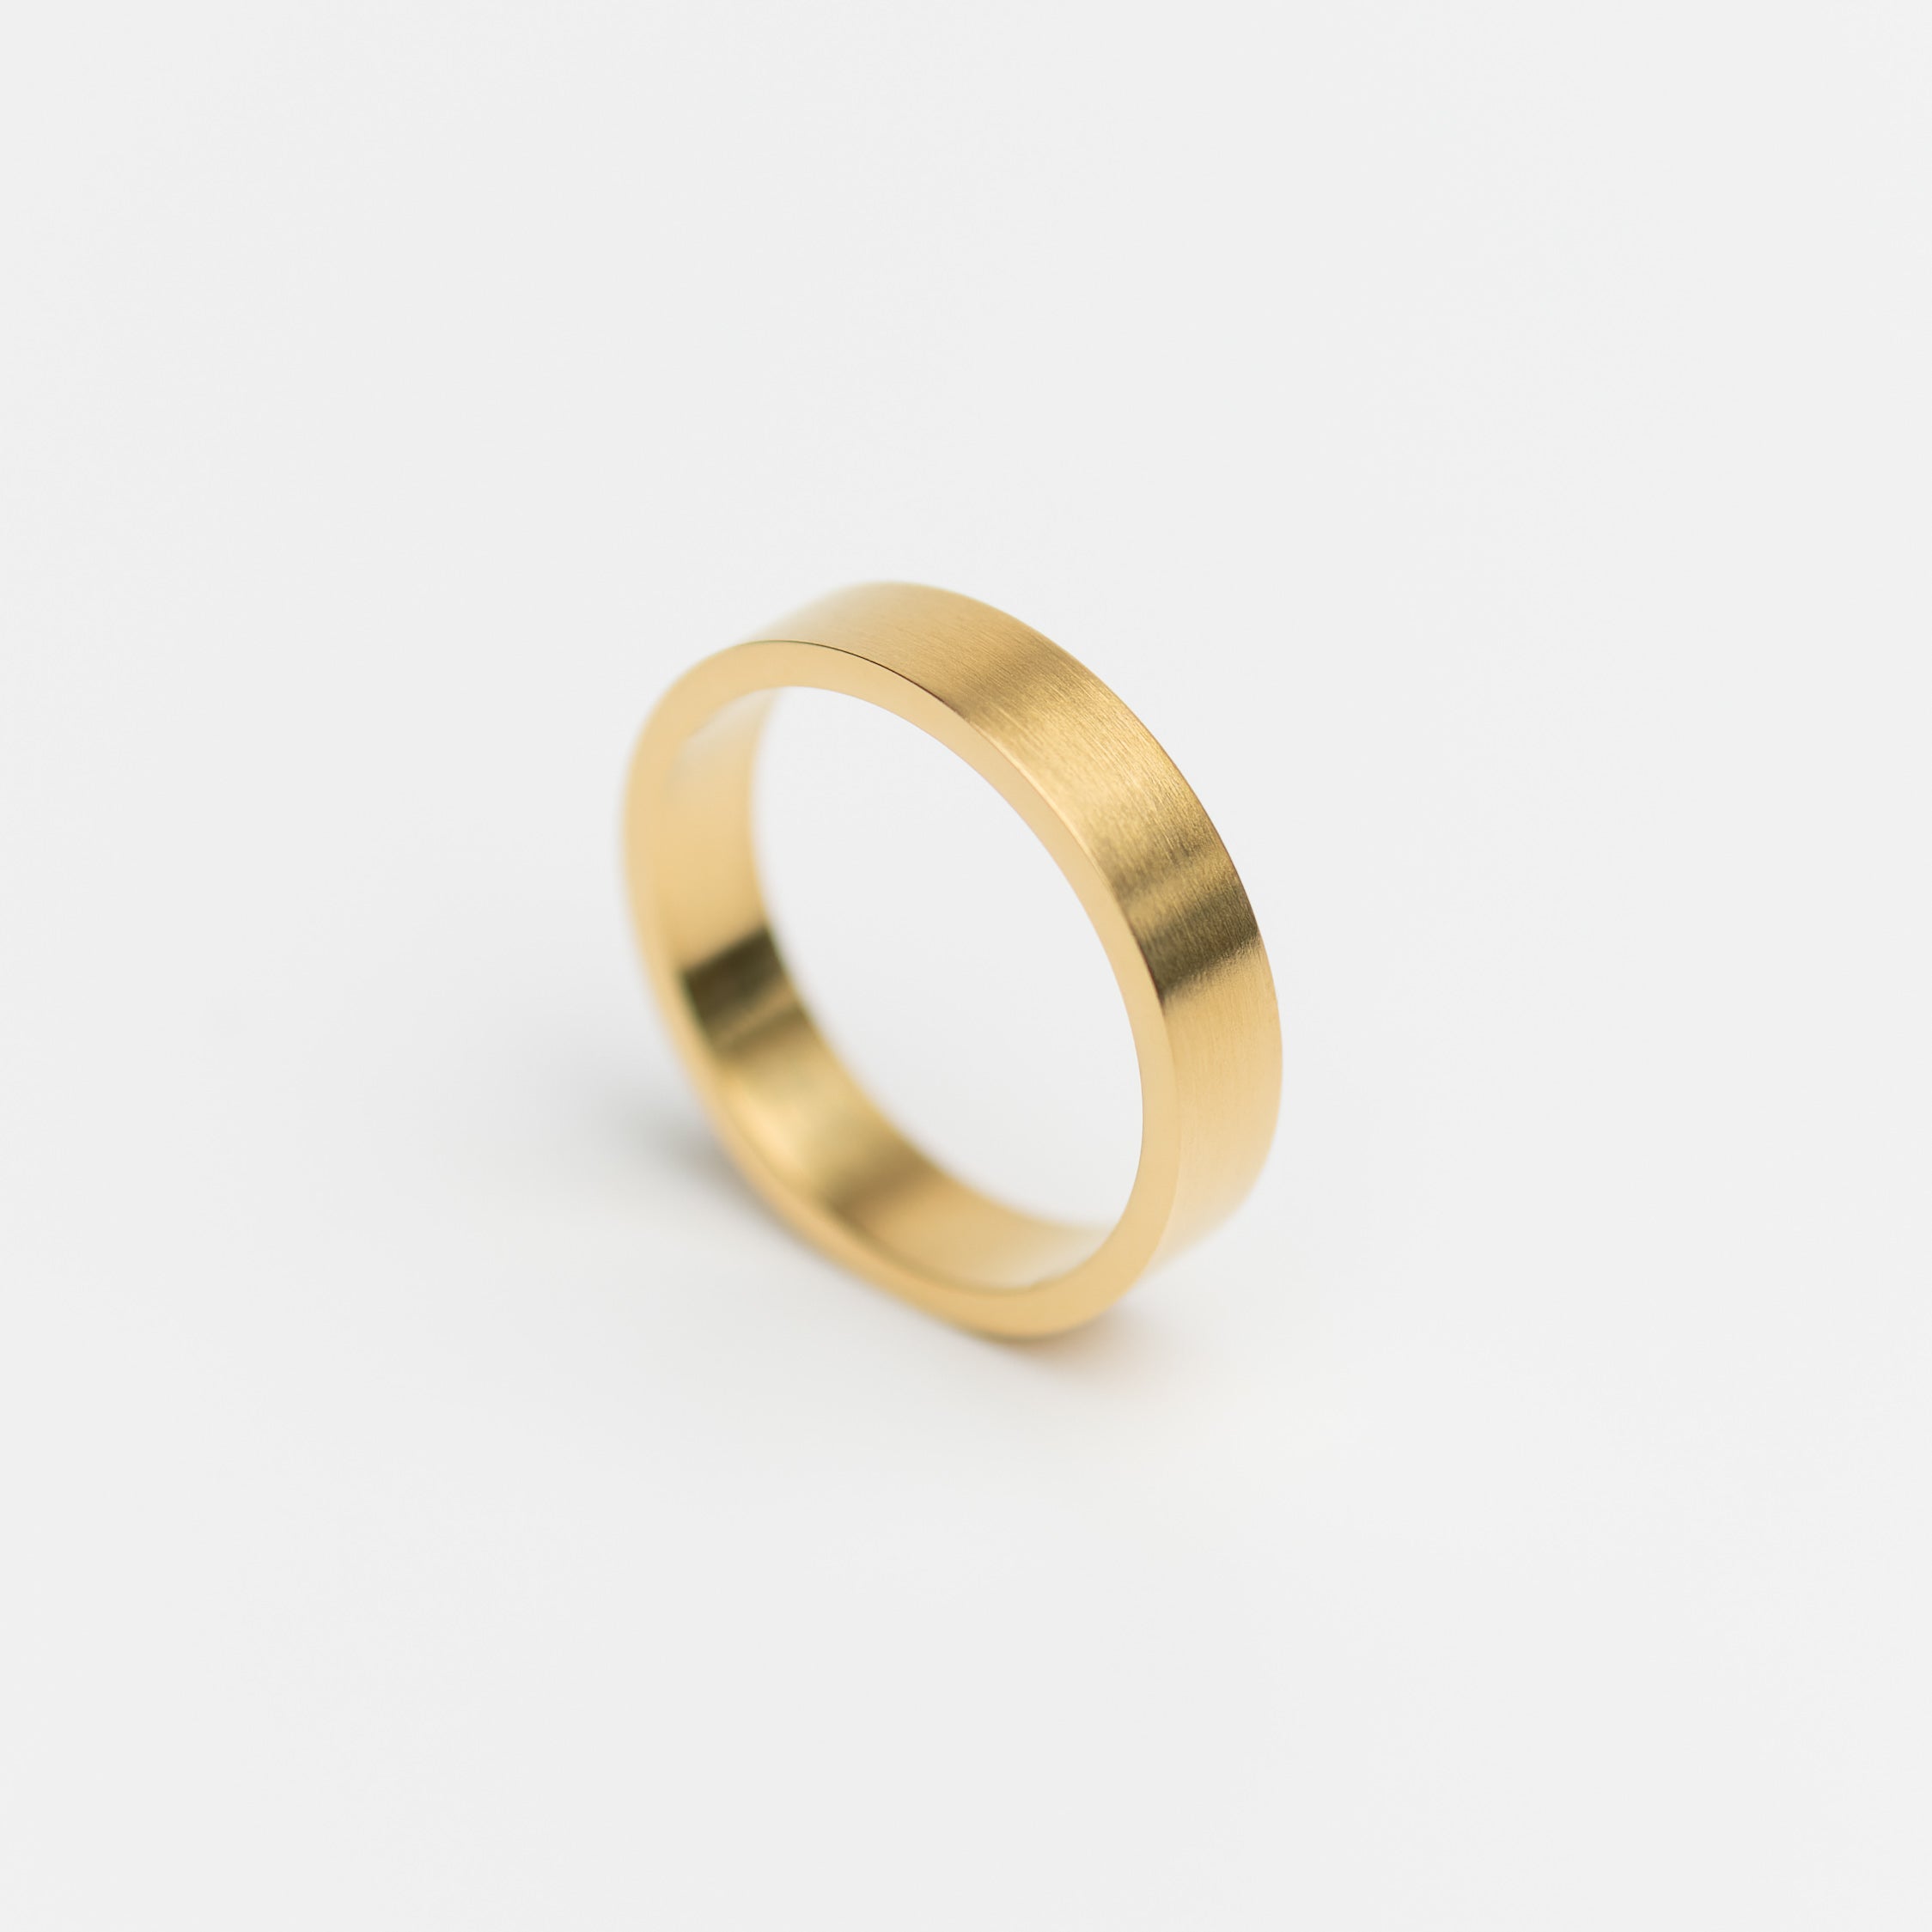 Rº5 - Stainless Steel 18K gold plated ring - Zafeer